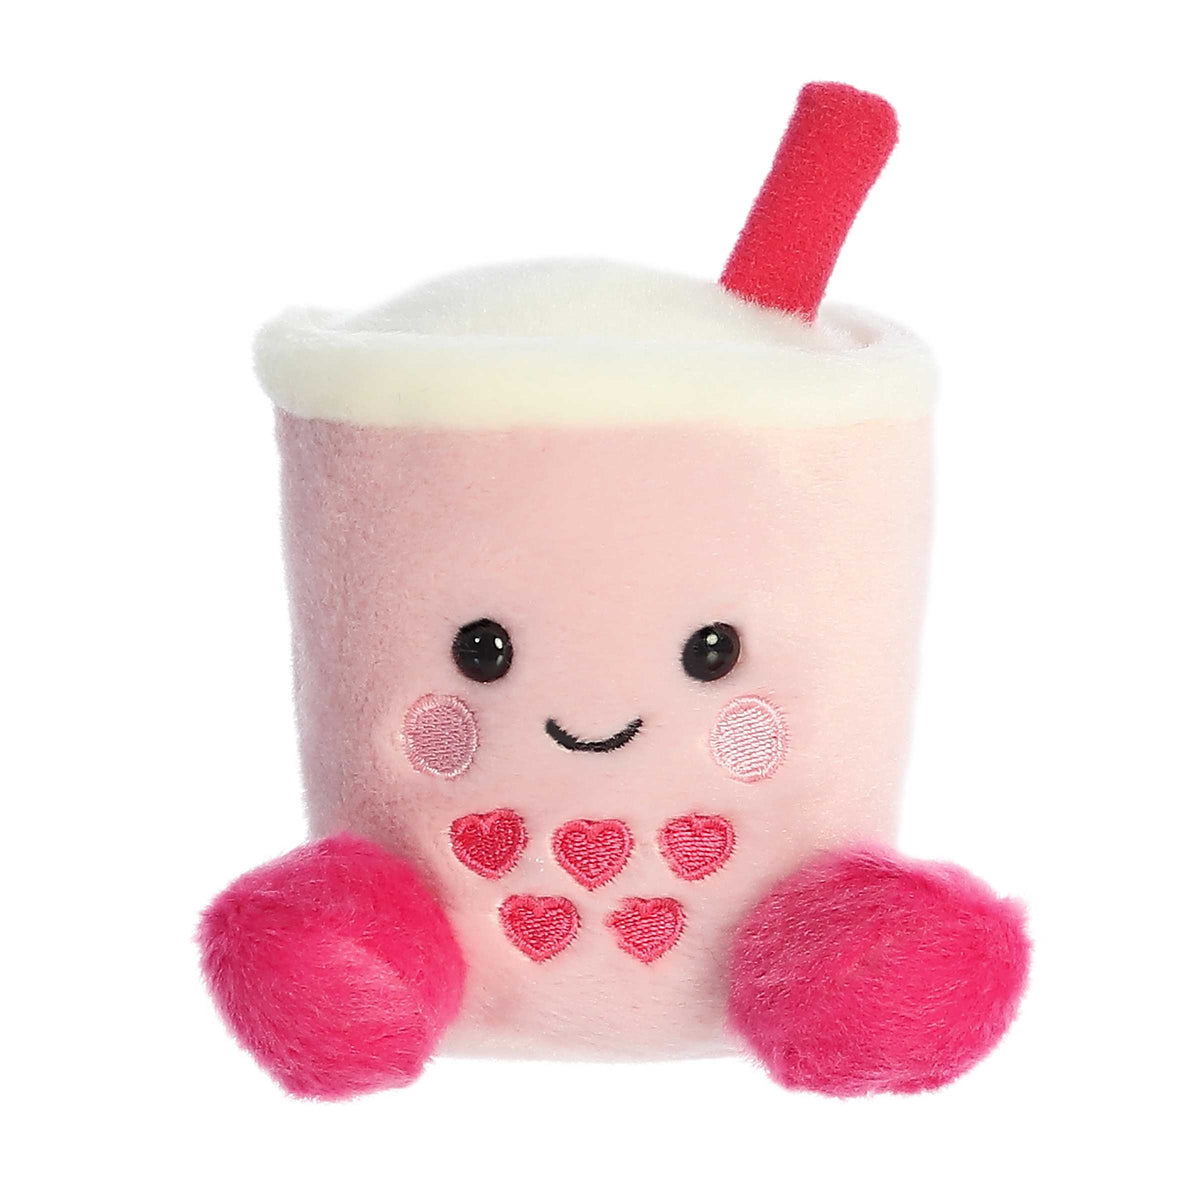 Adorable Boba tea plush from Palm Pals, designed as a boba cup with hearts and hot pink feet, radiating love and joy